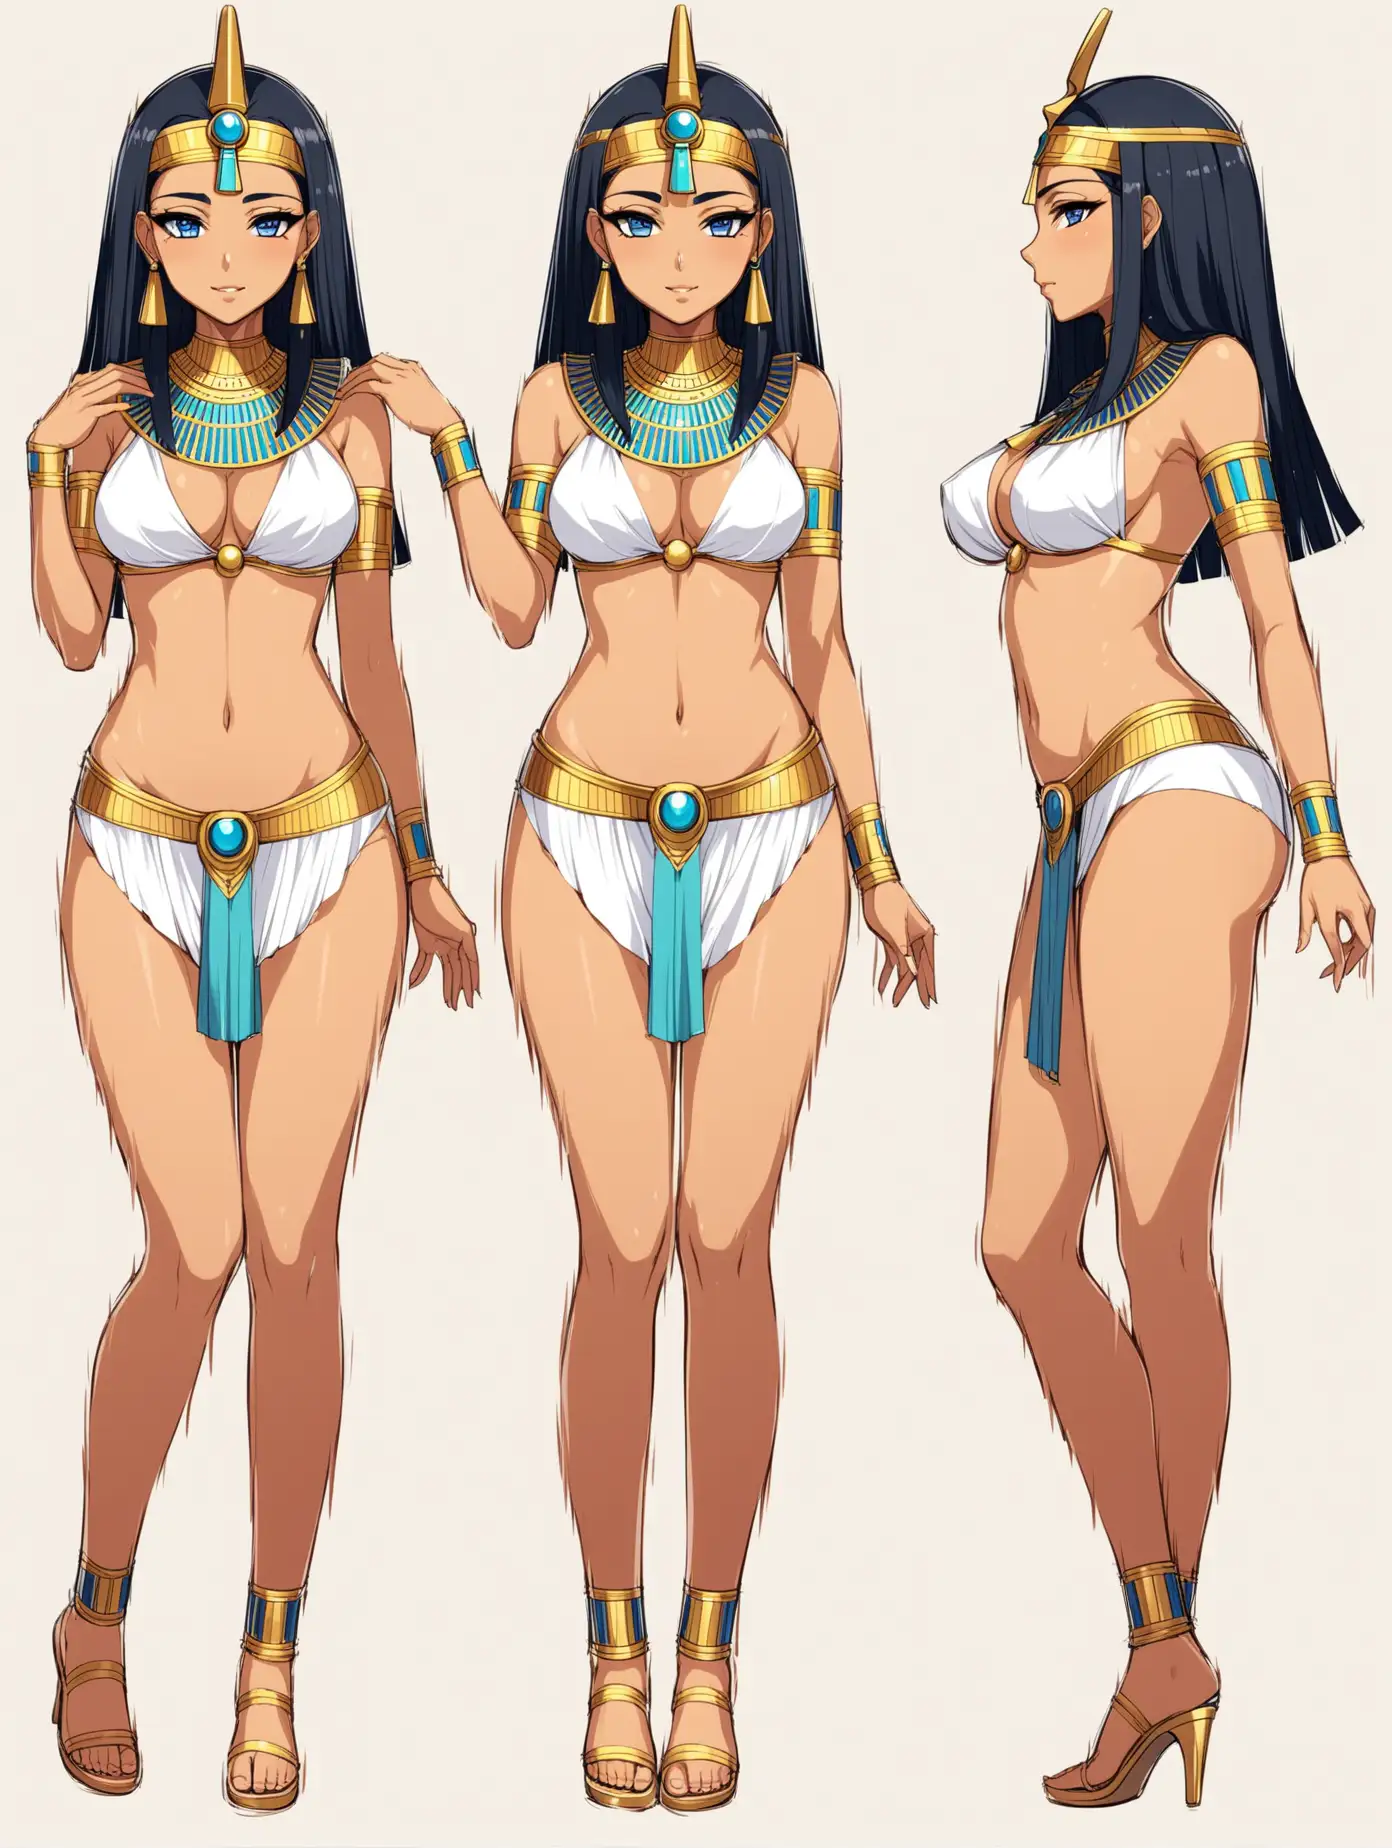 Seductive-Anime-Ancient-Egypt-Queen-Poses-in-Full-Body-Illustration